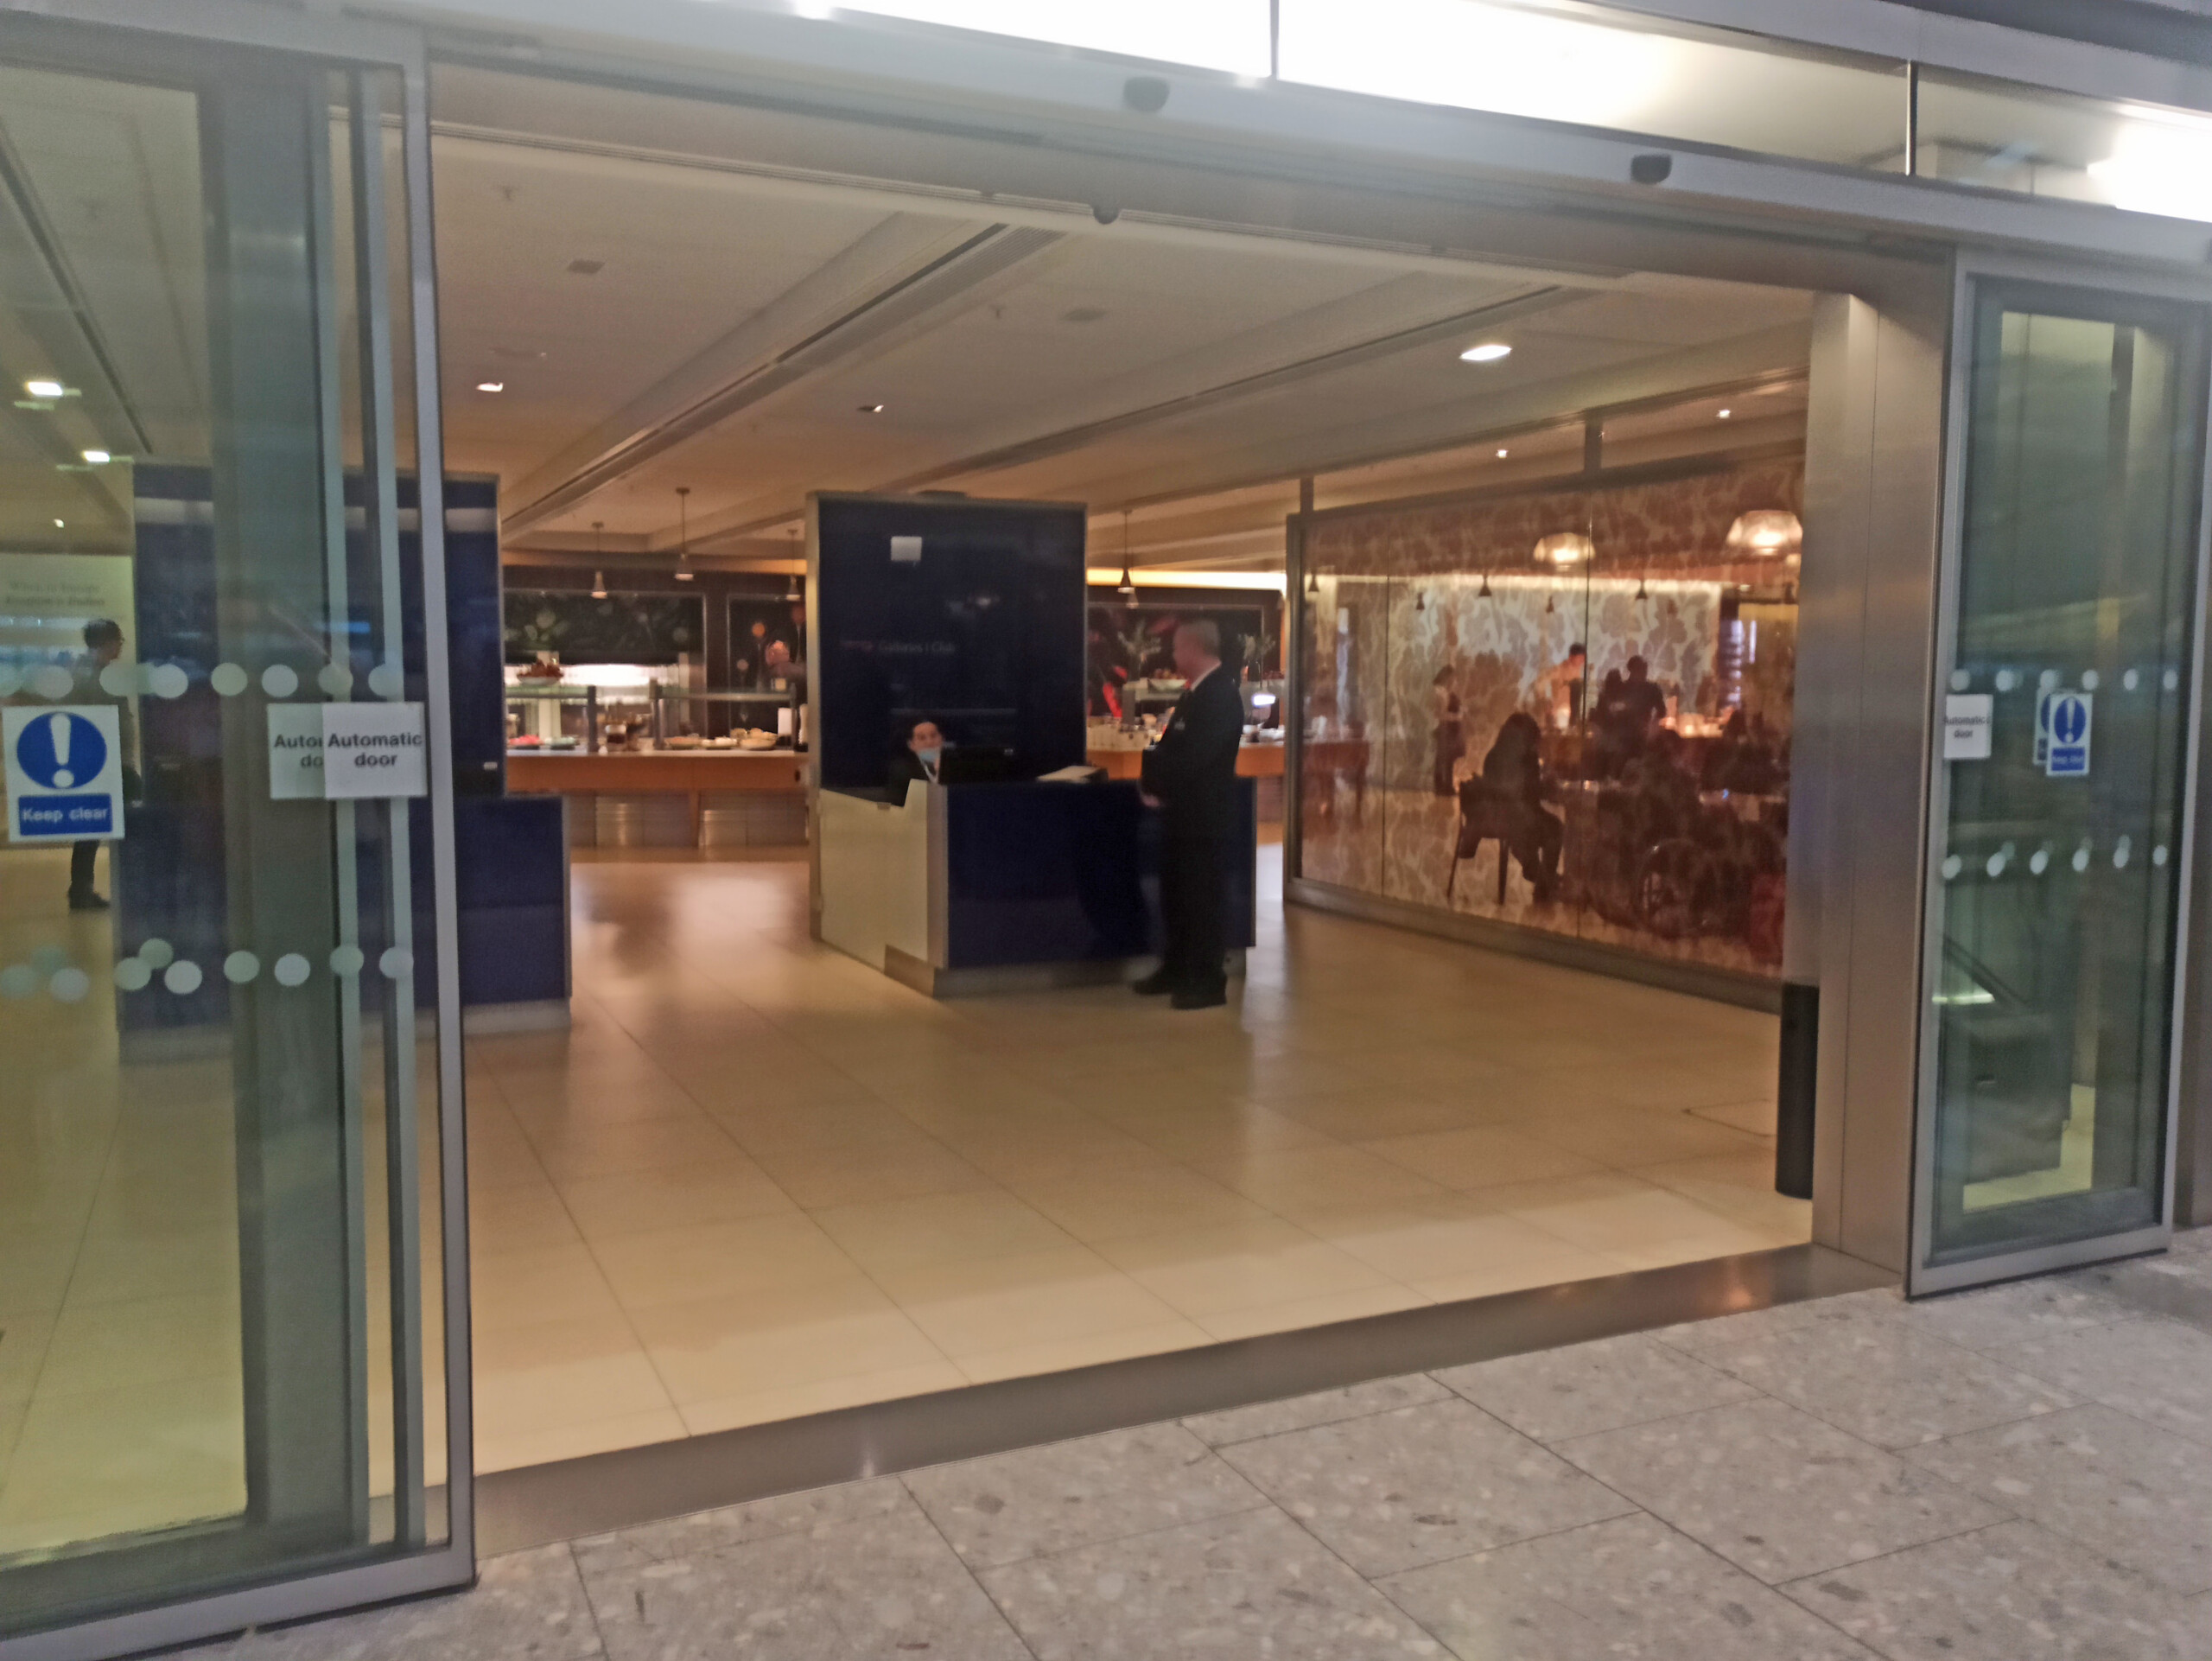 Main Entrance of the British Airways Club Lounge South